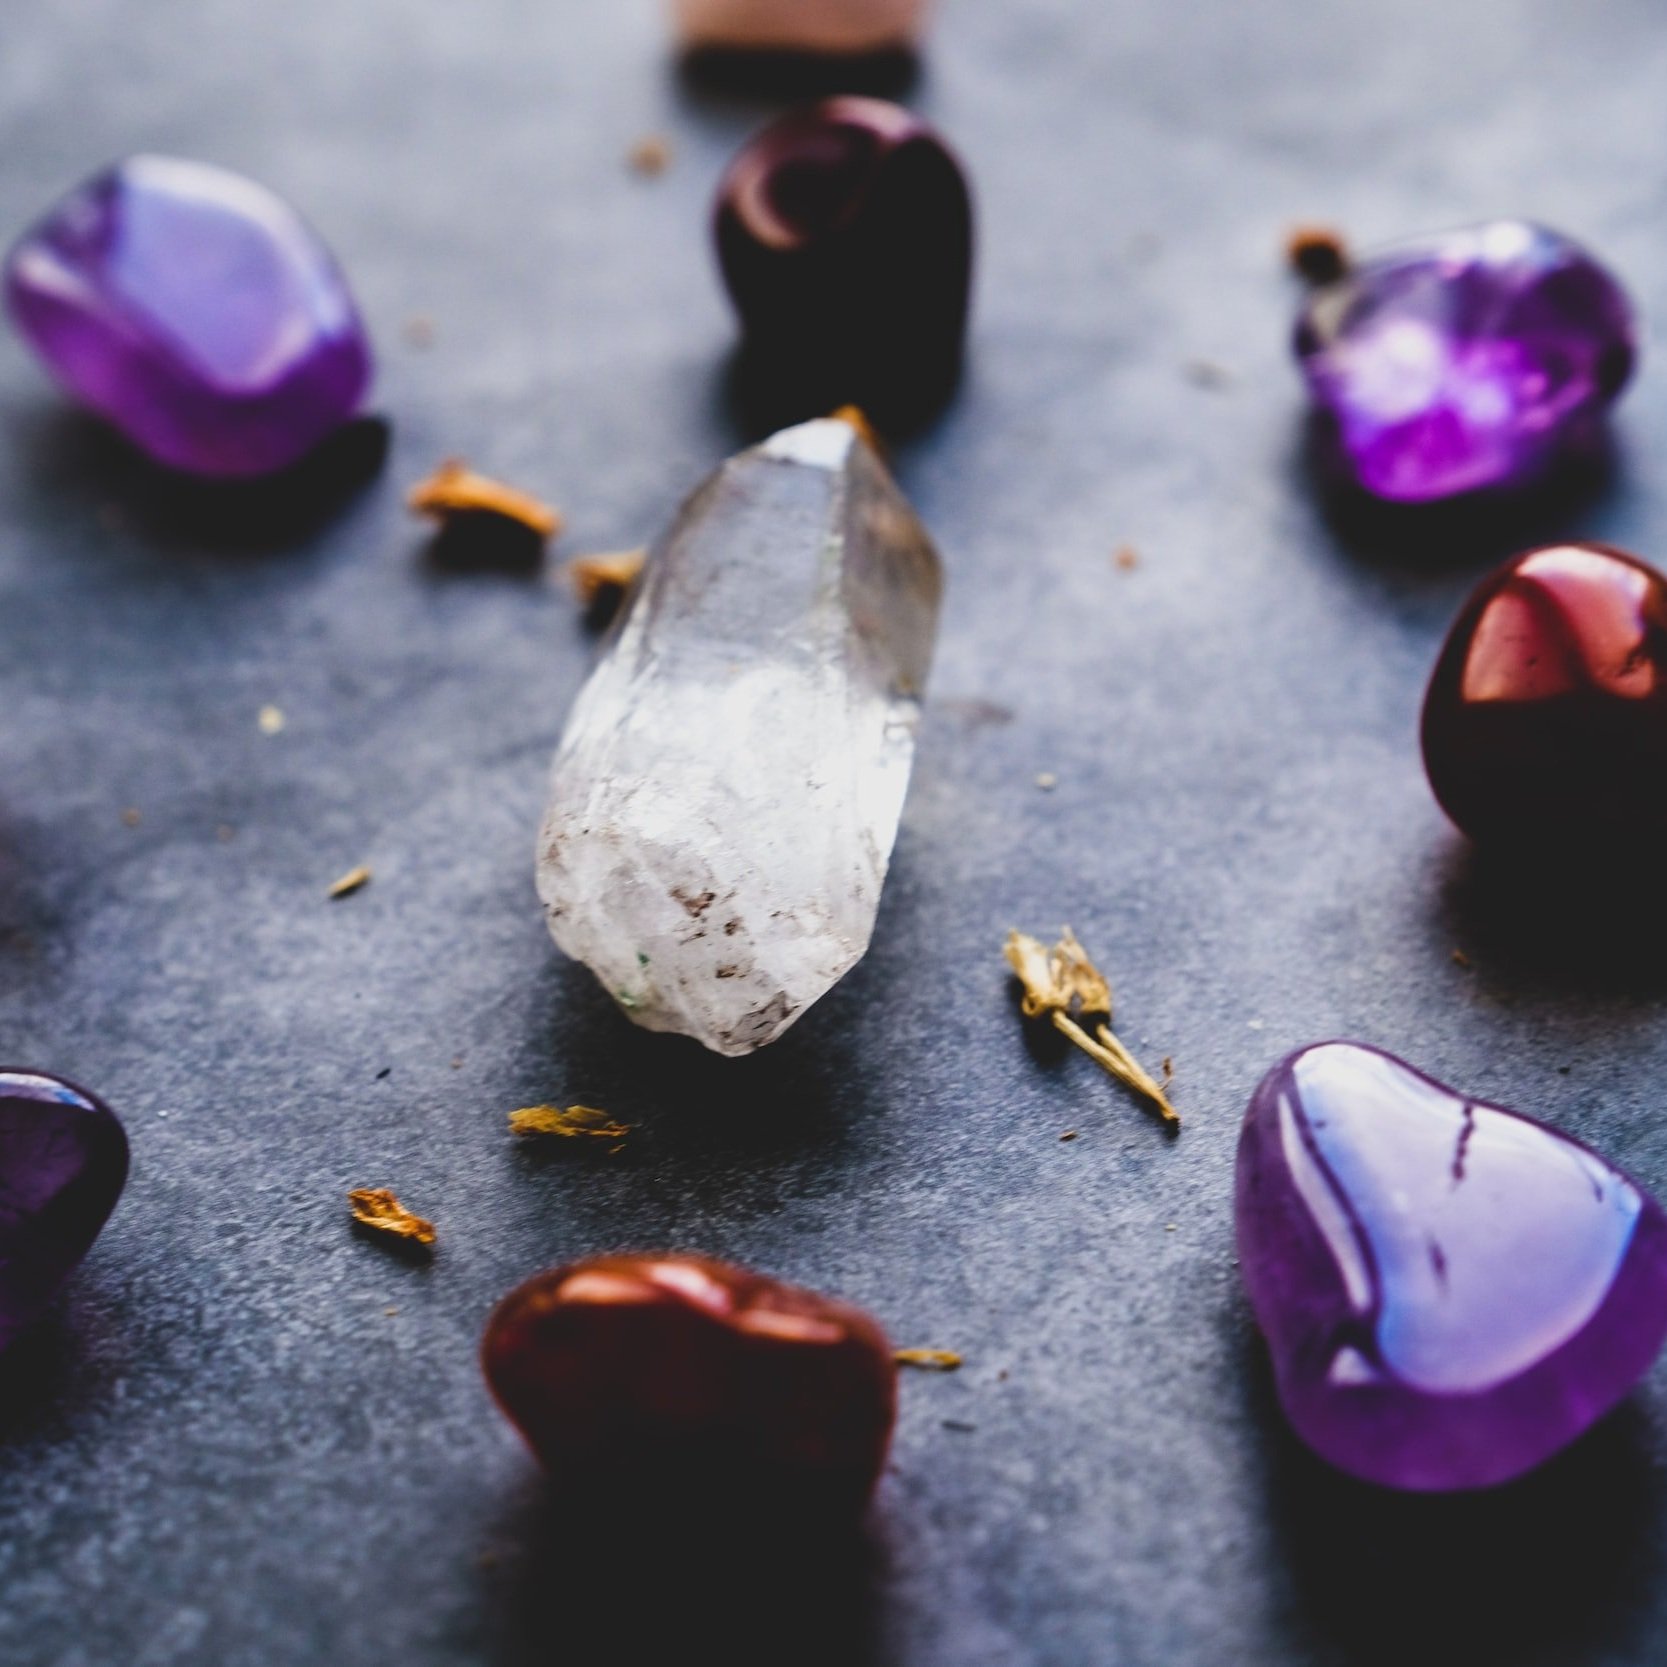 Crystal Therapy Resources